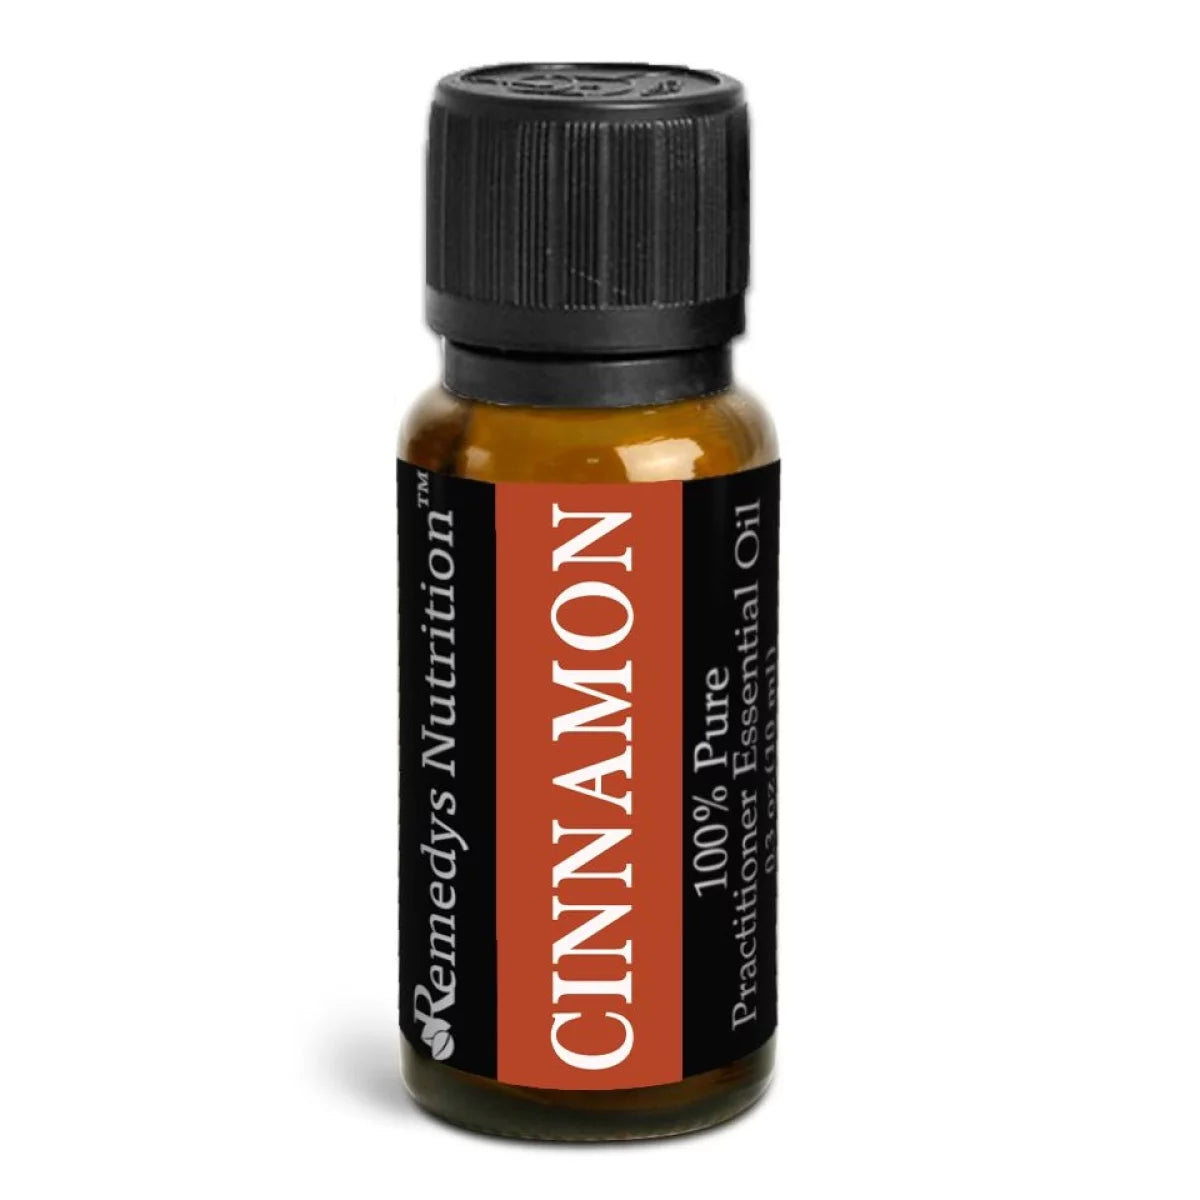 Image of Remedy's Nutrition® Cinnamon Essential Oil Herbal Supplement front bottle.